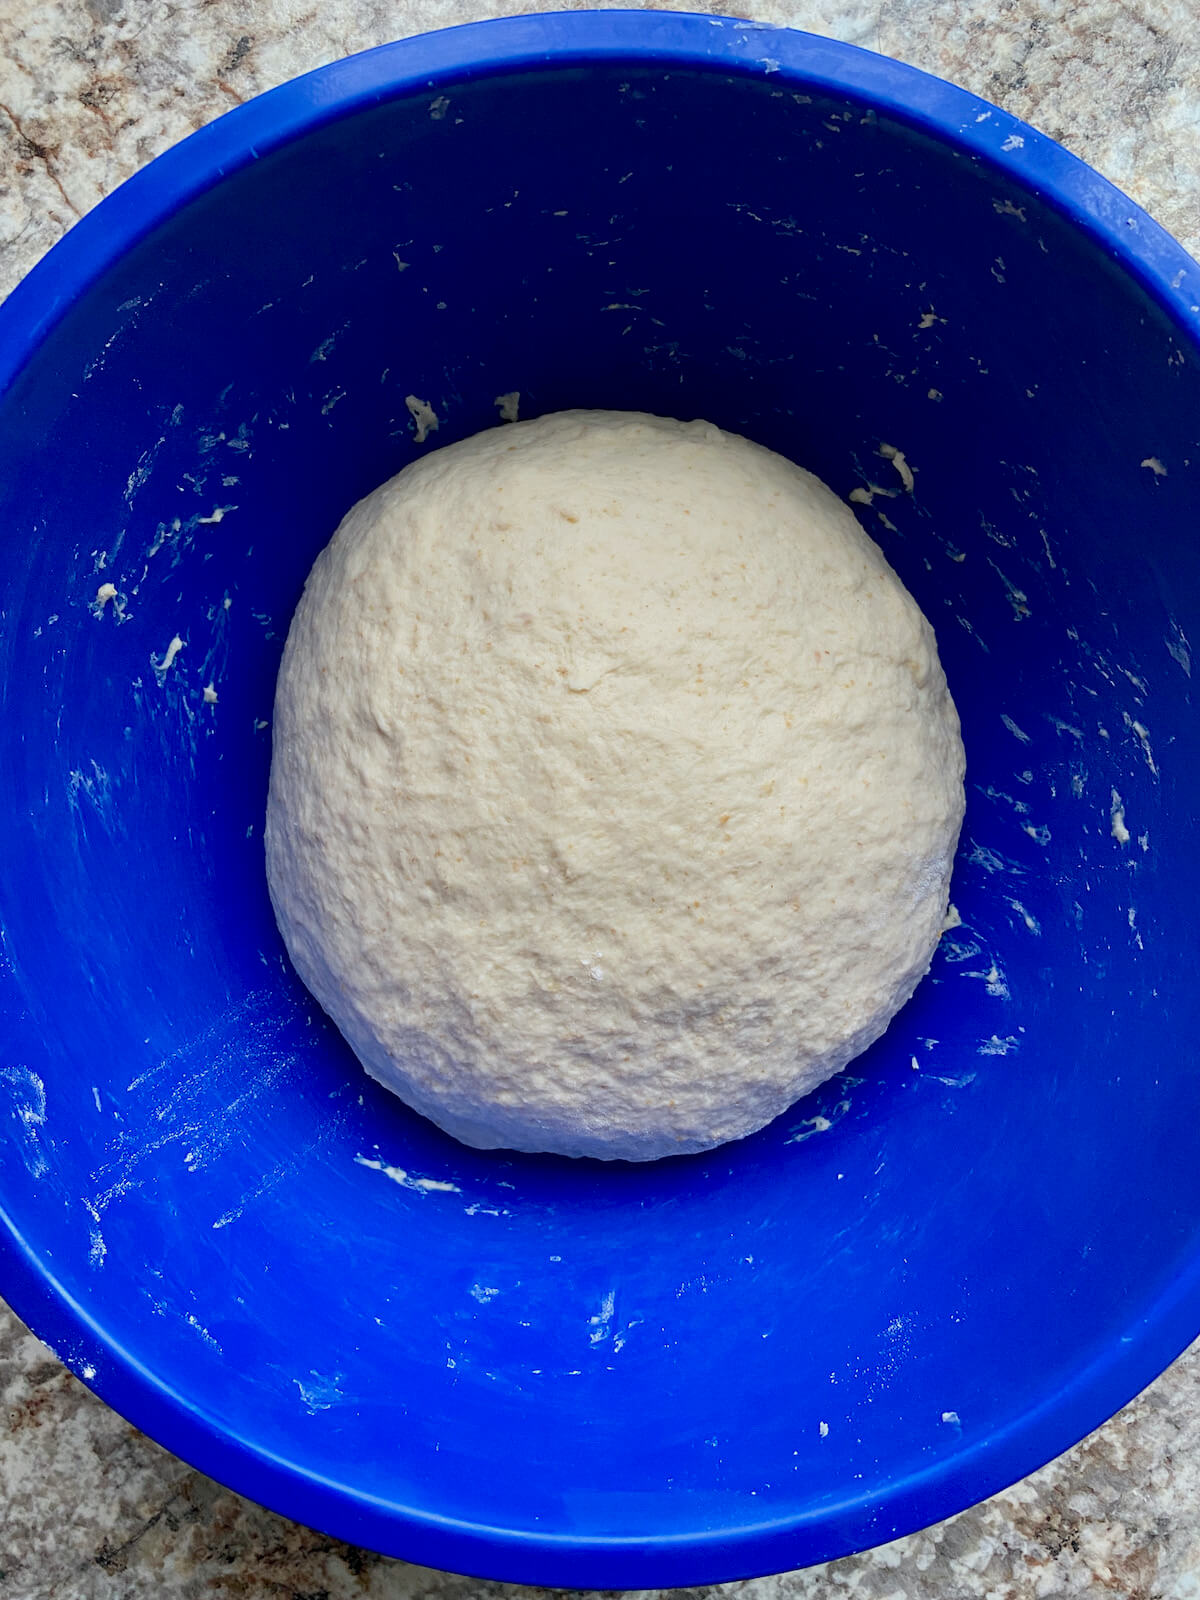 Sourdough garlic knot dough in a blue mixing bowl after being kneaded.